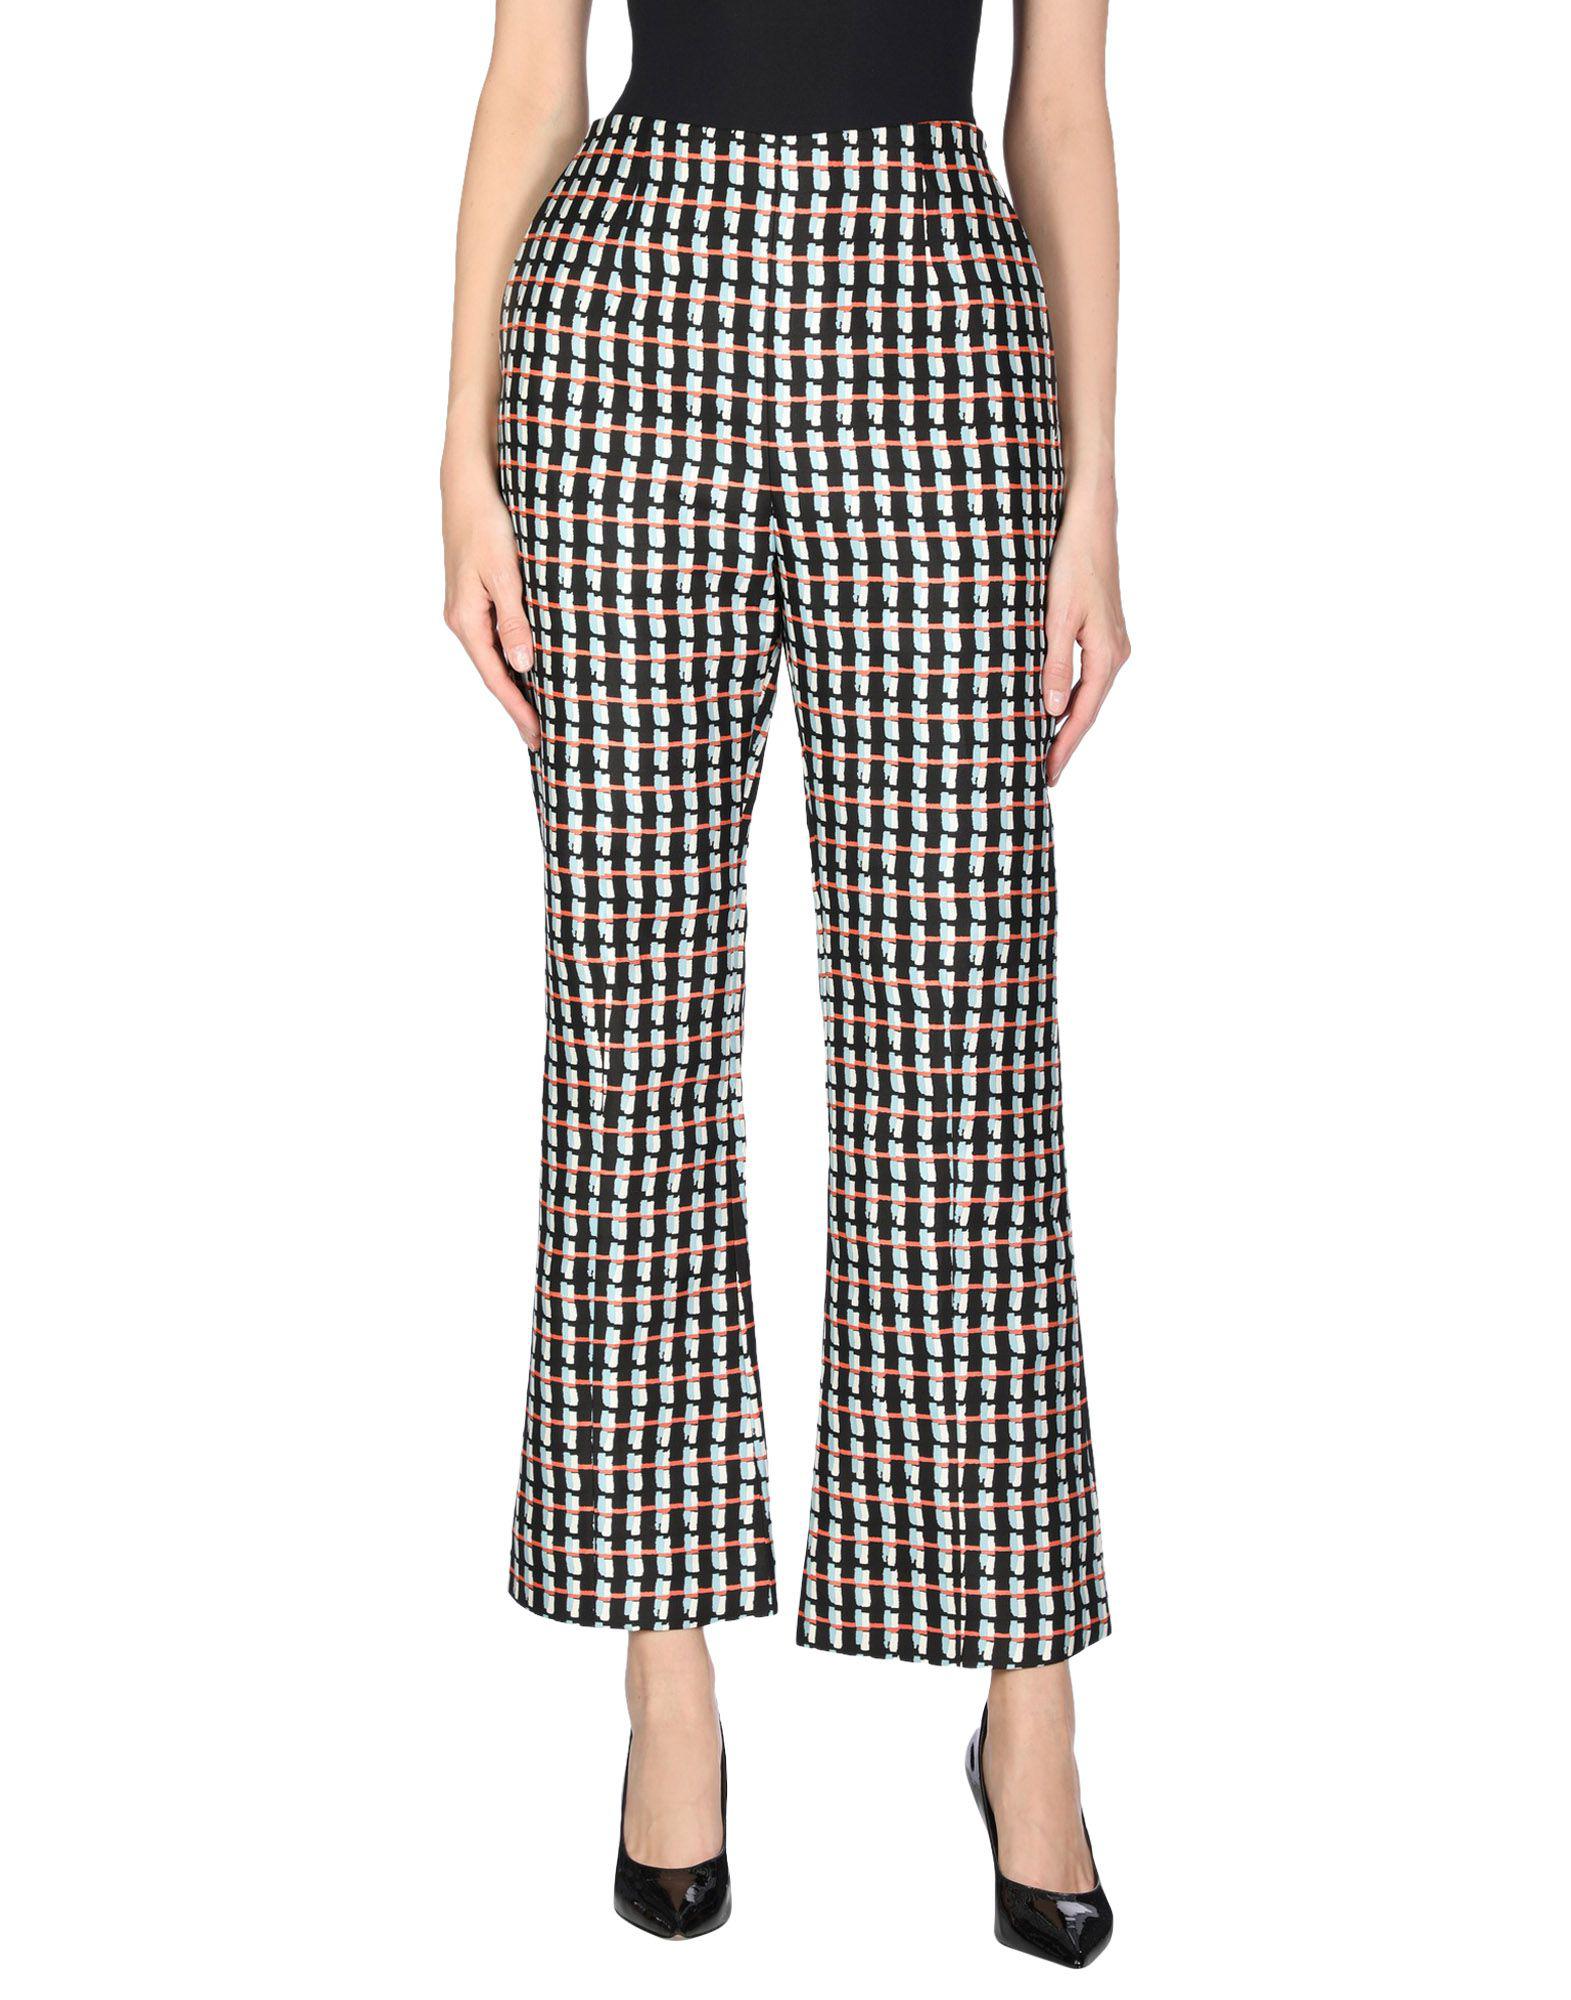 Marni Cotton Casual Pants in Black - Lyst